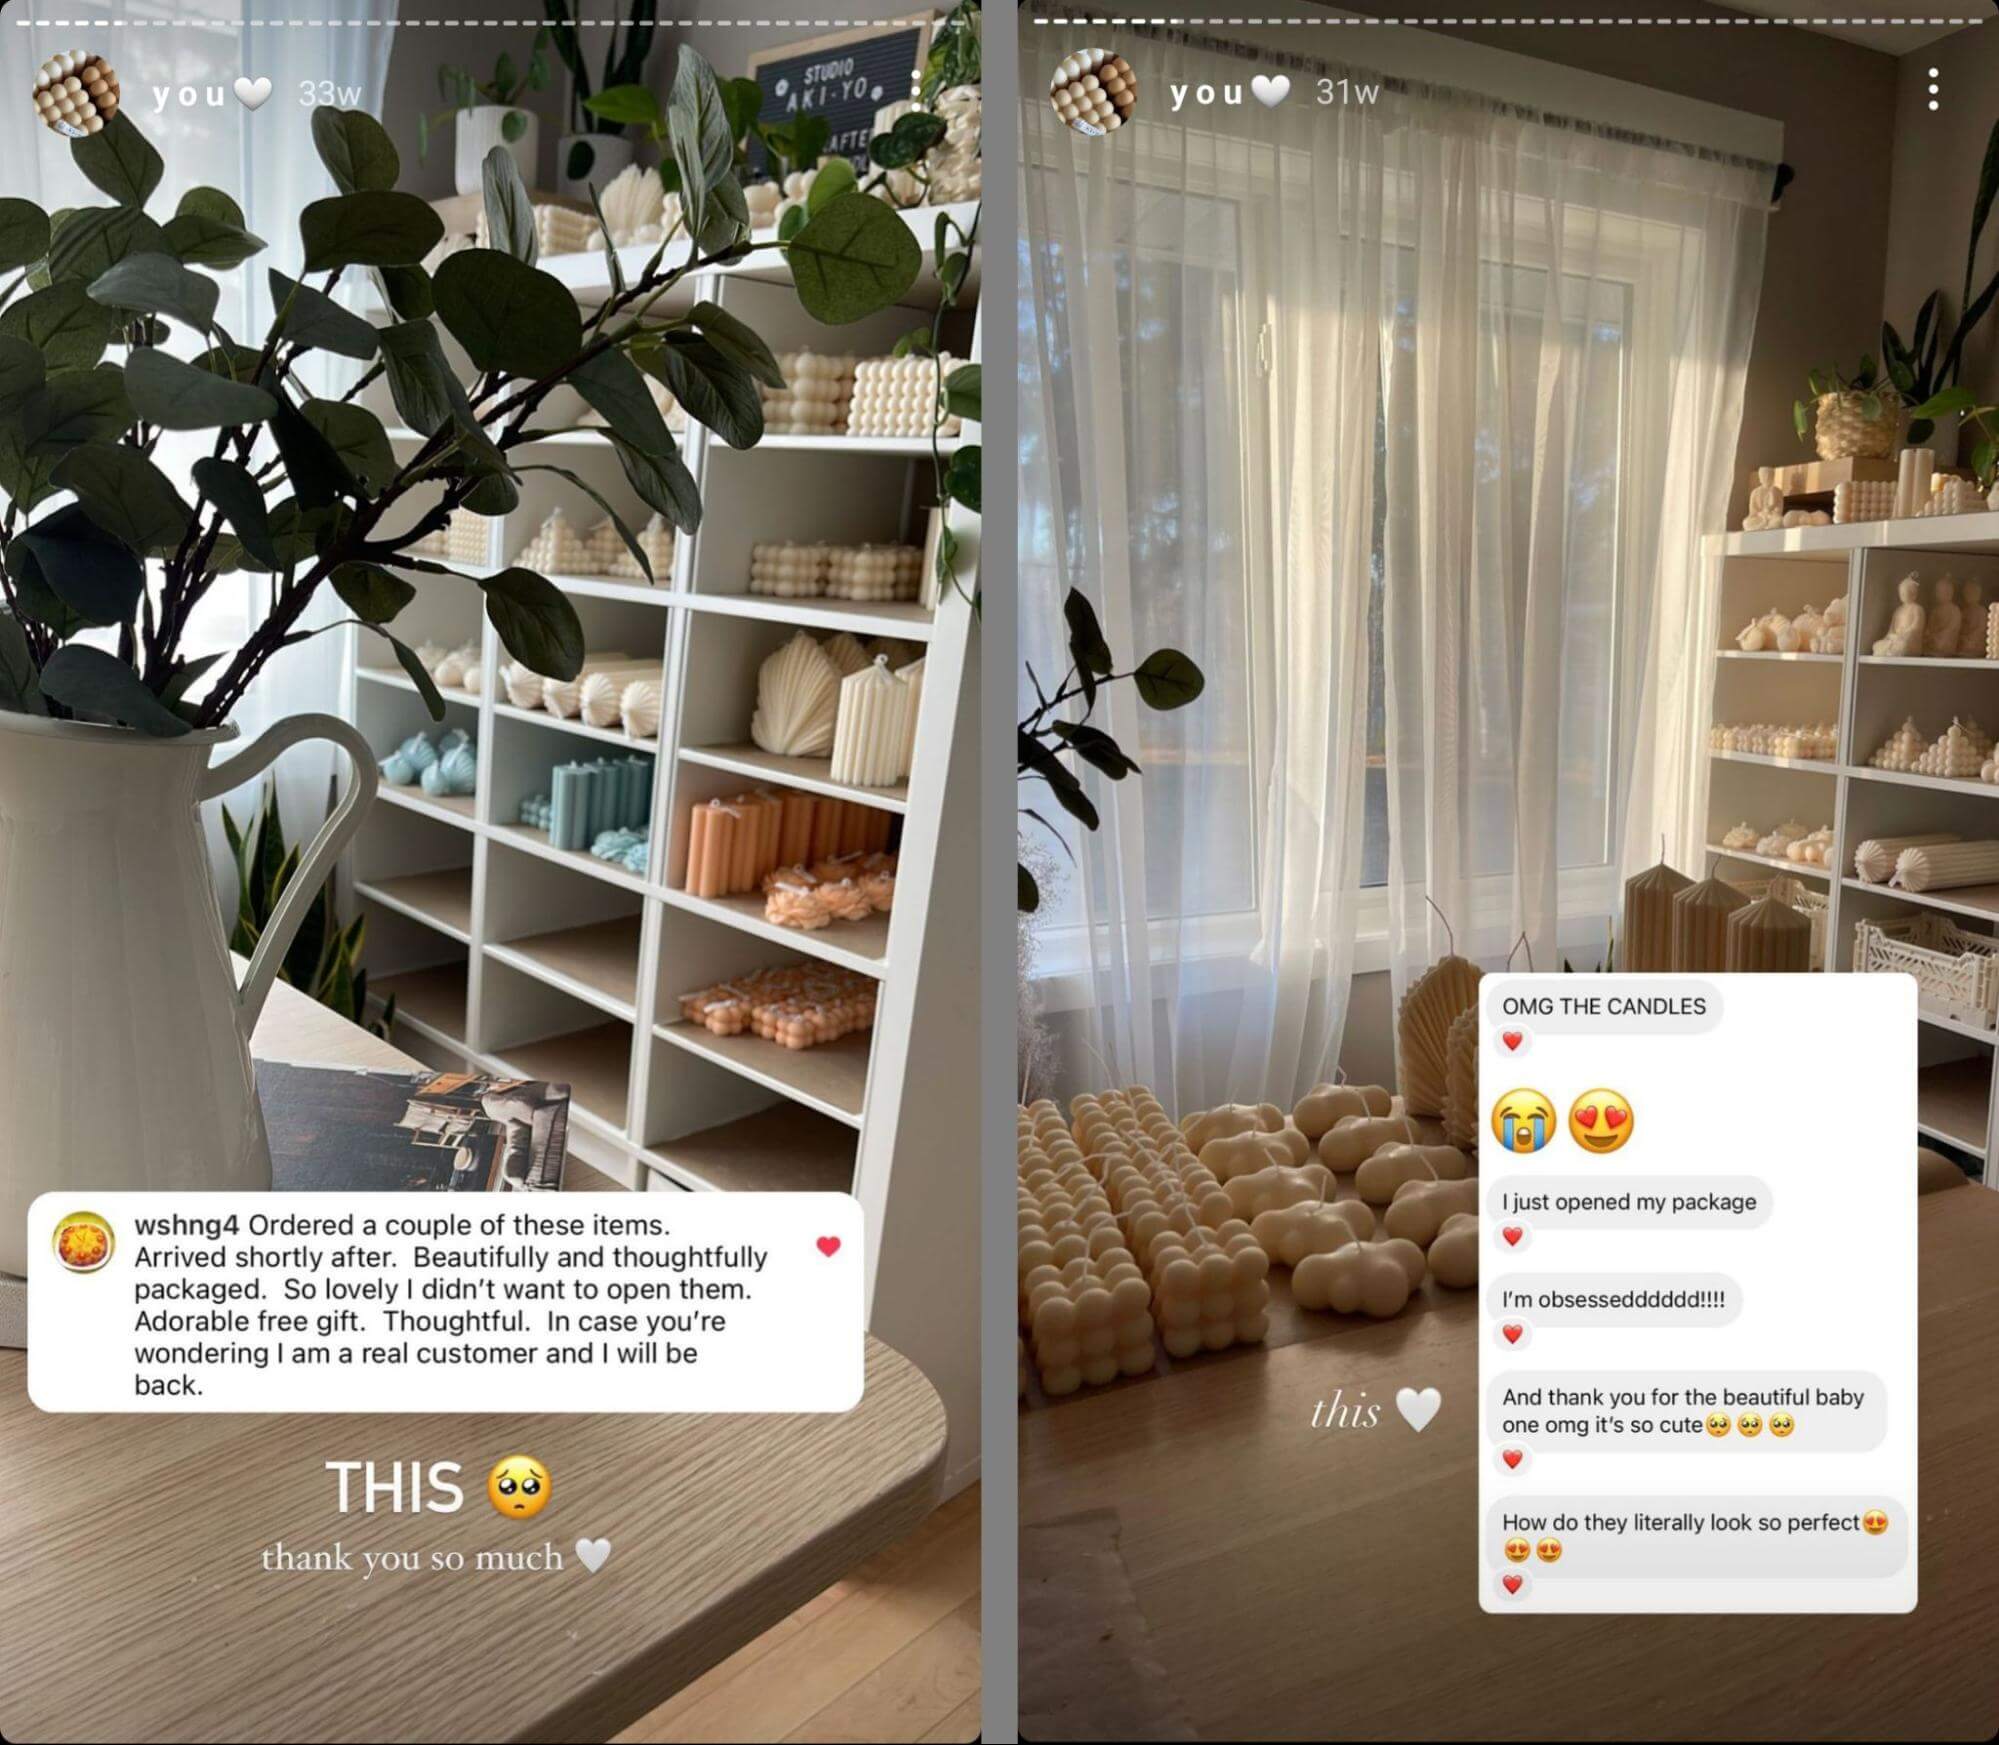 how-to-design-a-well-rounded-content-plan-on-instagram-stories-feature-snapshots-of-customer-comments-and-dms-testimonials-added-to-story-highlight-studioakiyo-example-6